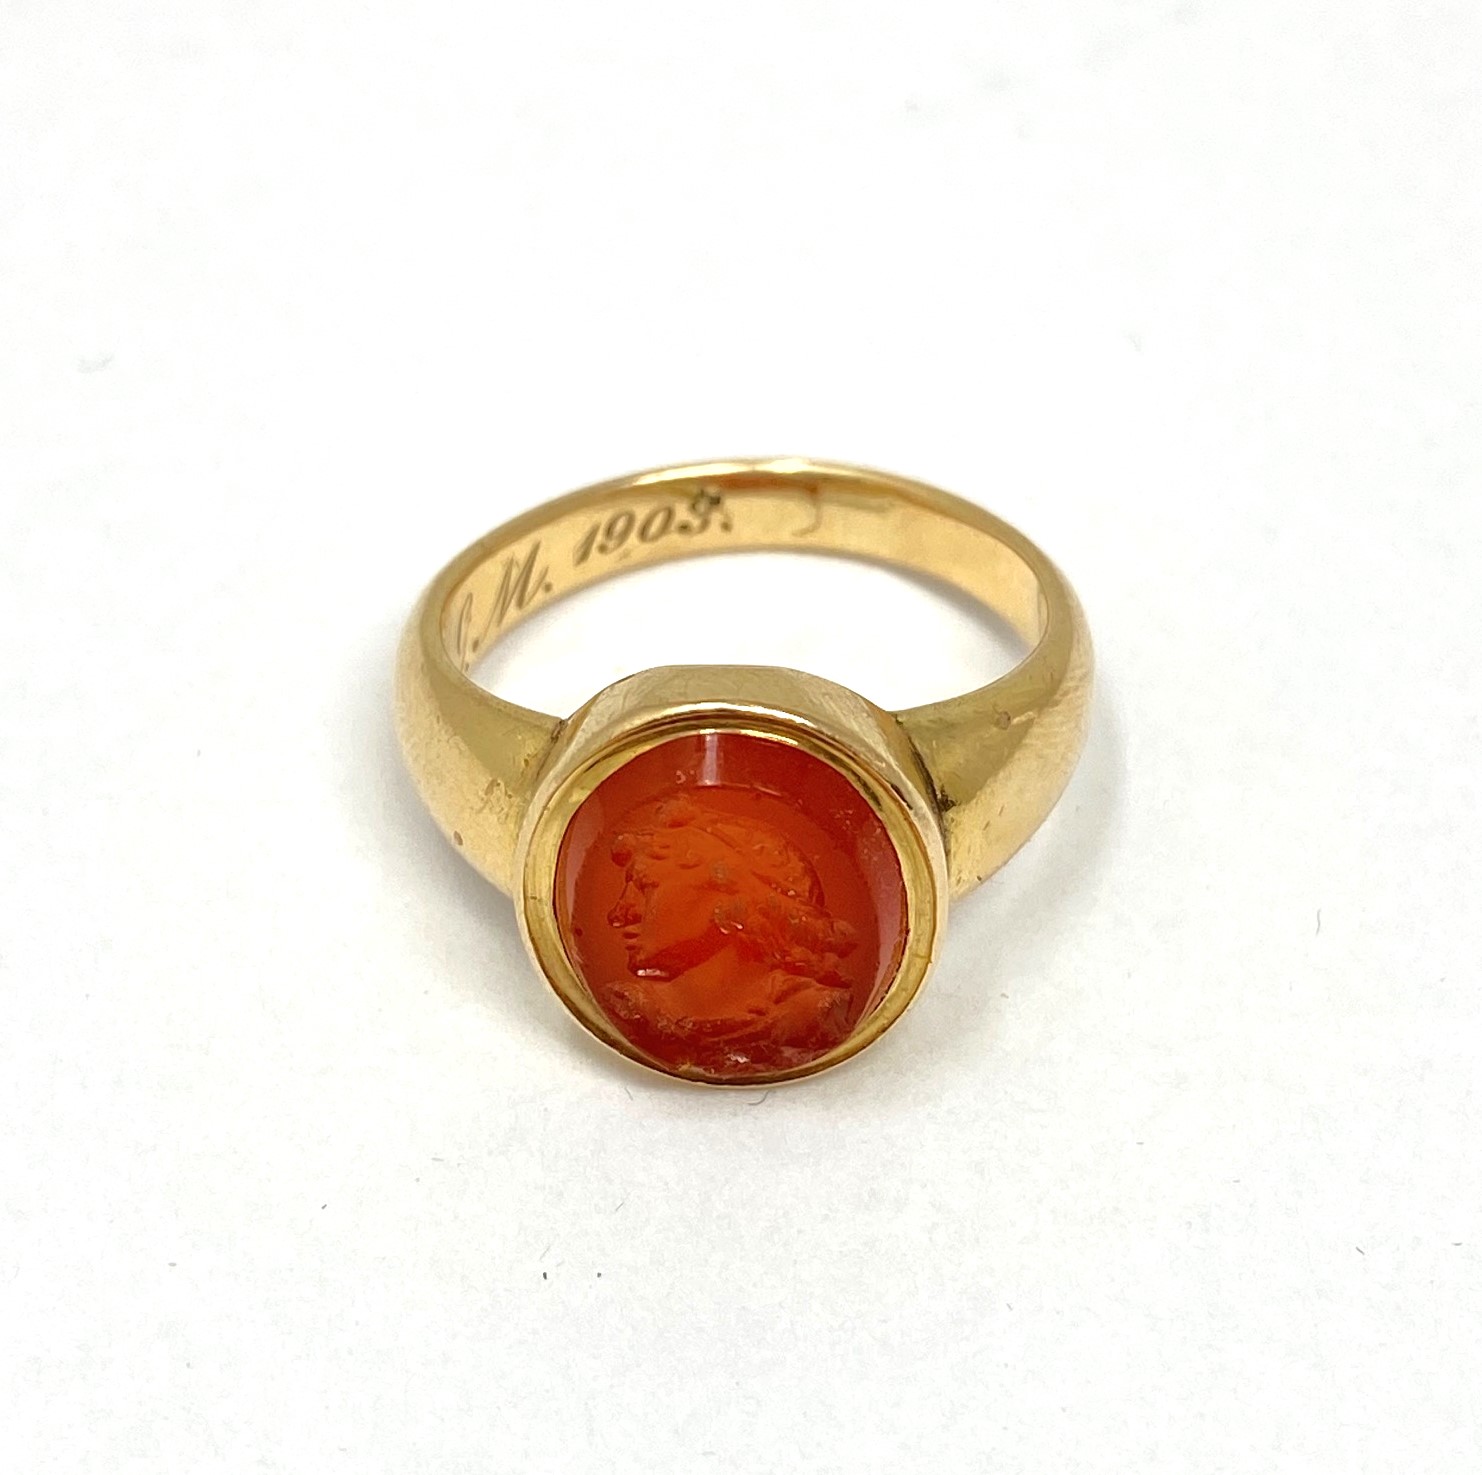 CARNELIAN INTAGLIO GOLD SIGNET RING, EARLY 19TH CENTURY - Image 4 of 6